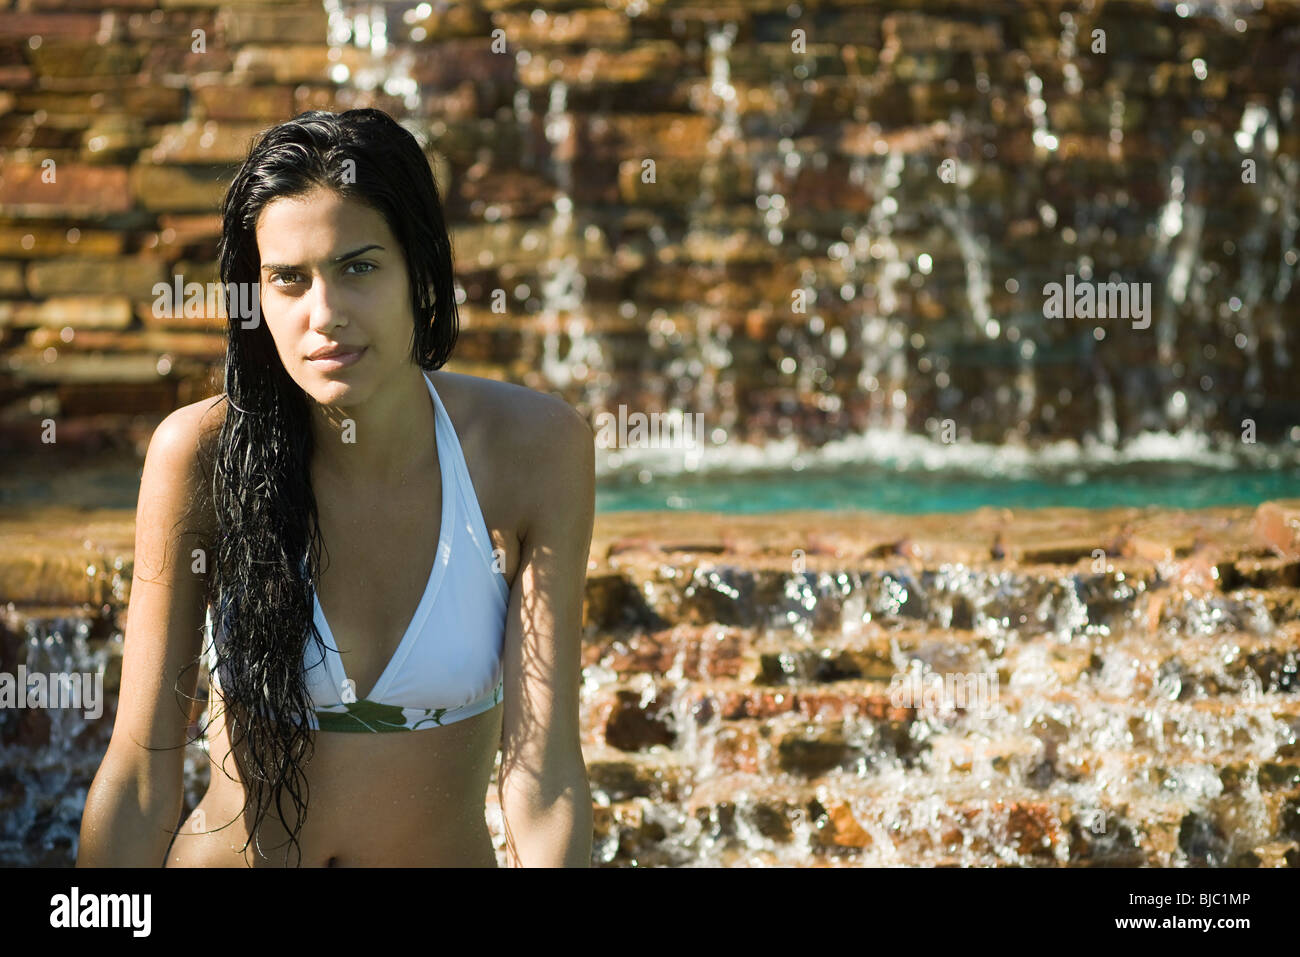 Young woman in bikini relaxing by waterfall Banque D'Images